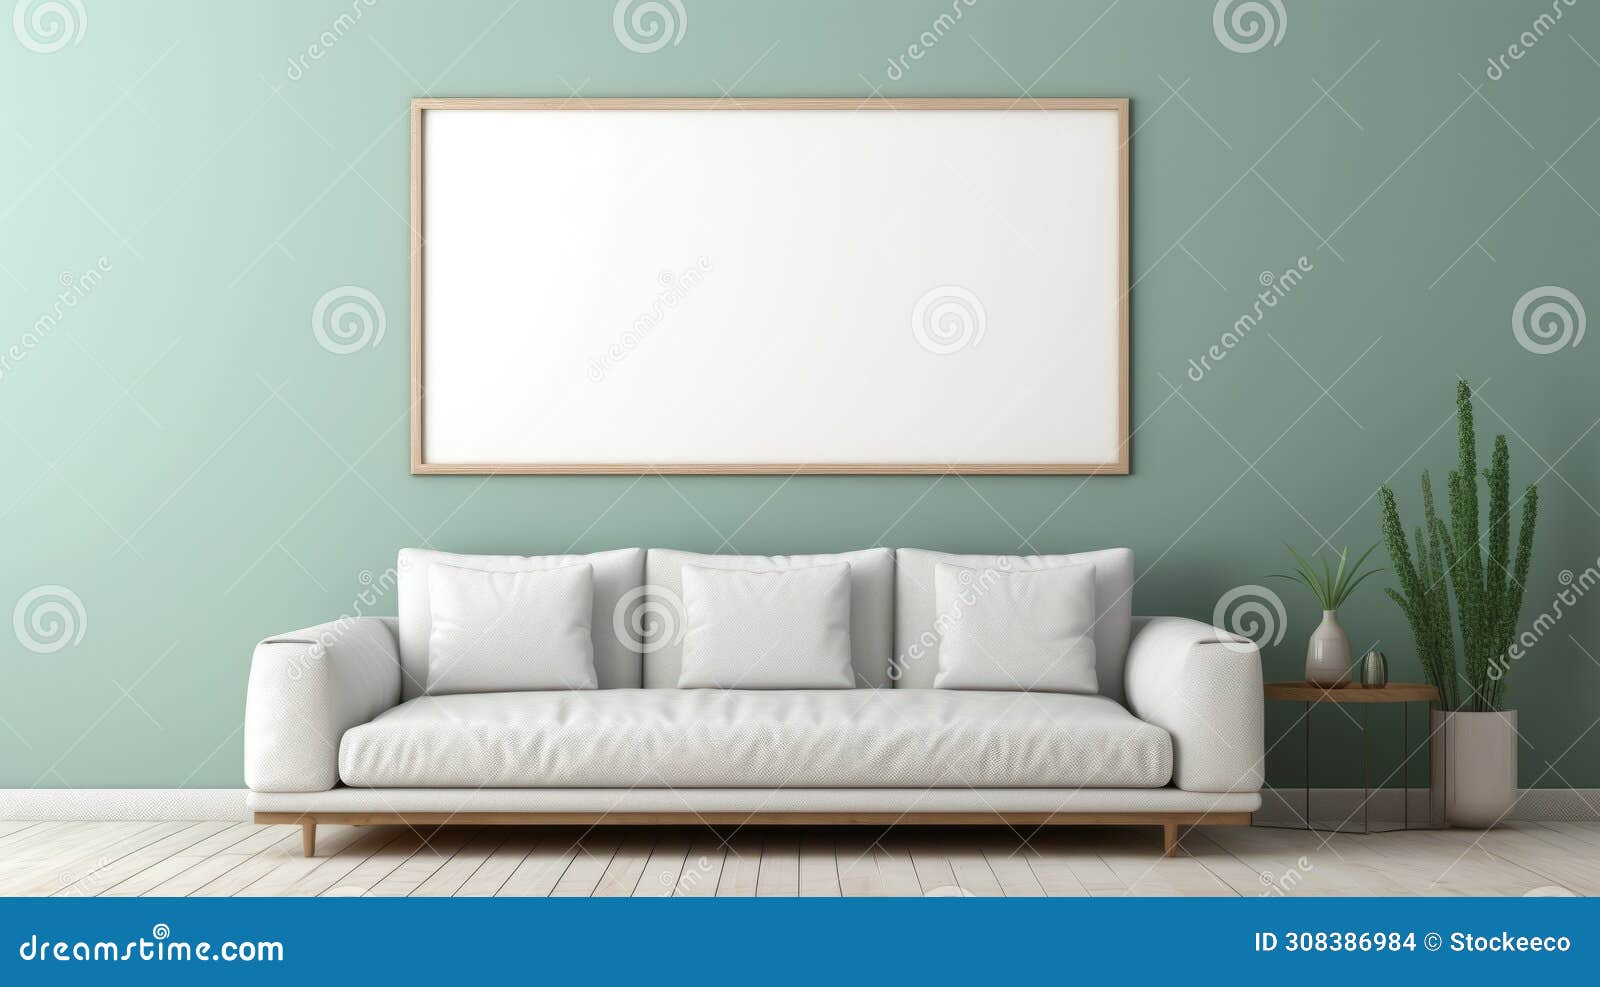 green couch with blank framed picture: soft pastel colors, 8k resolution